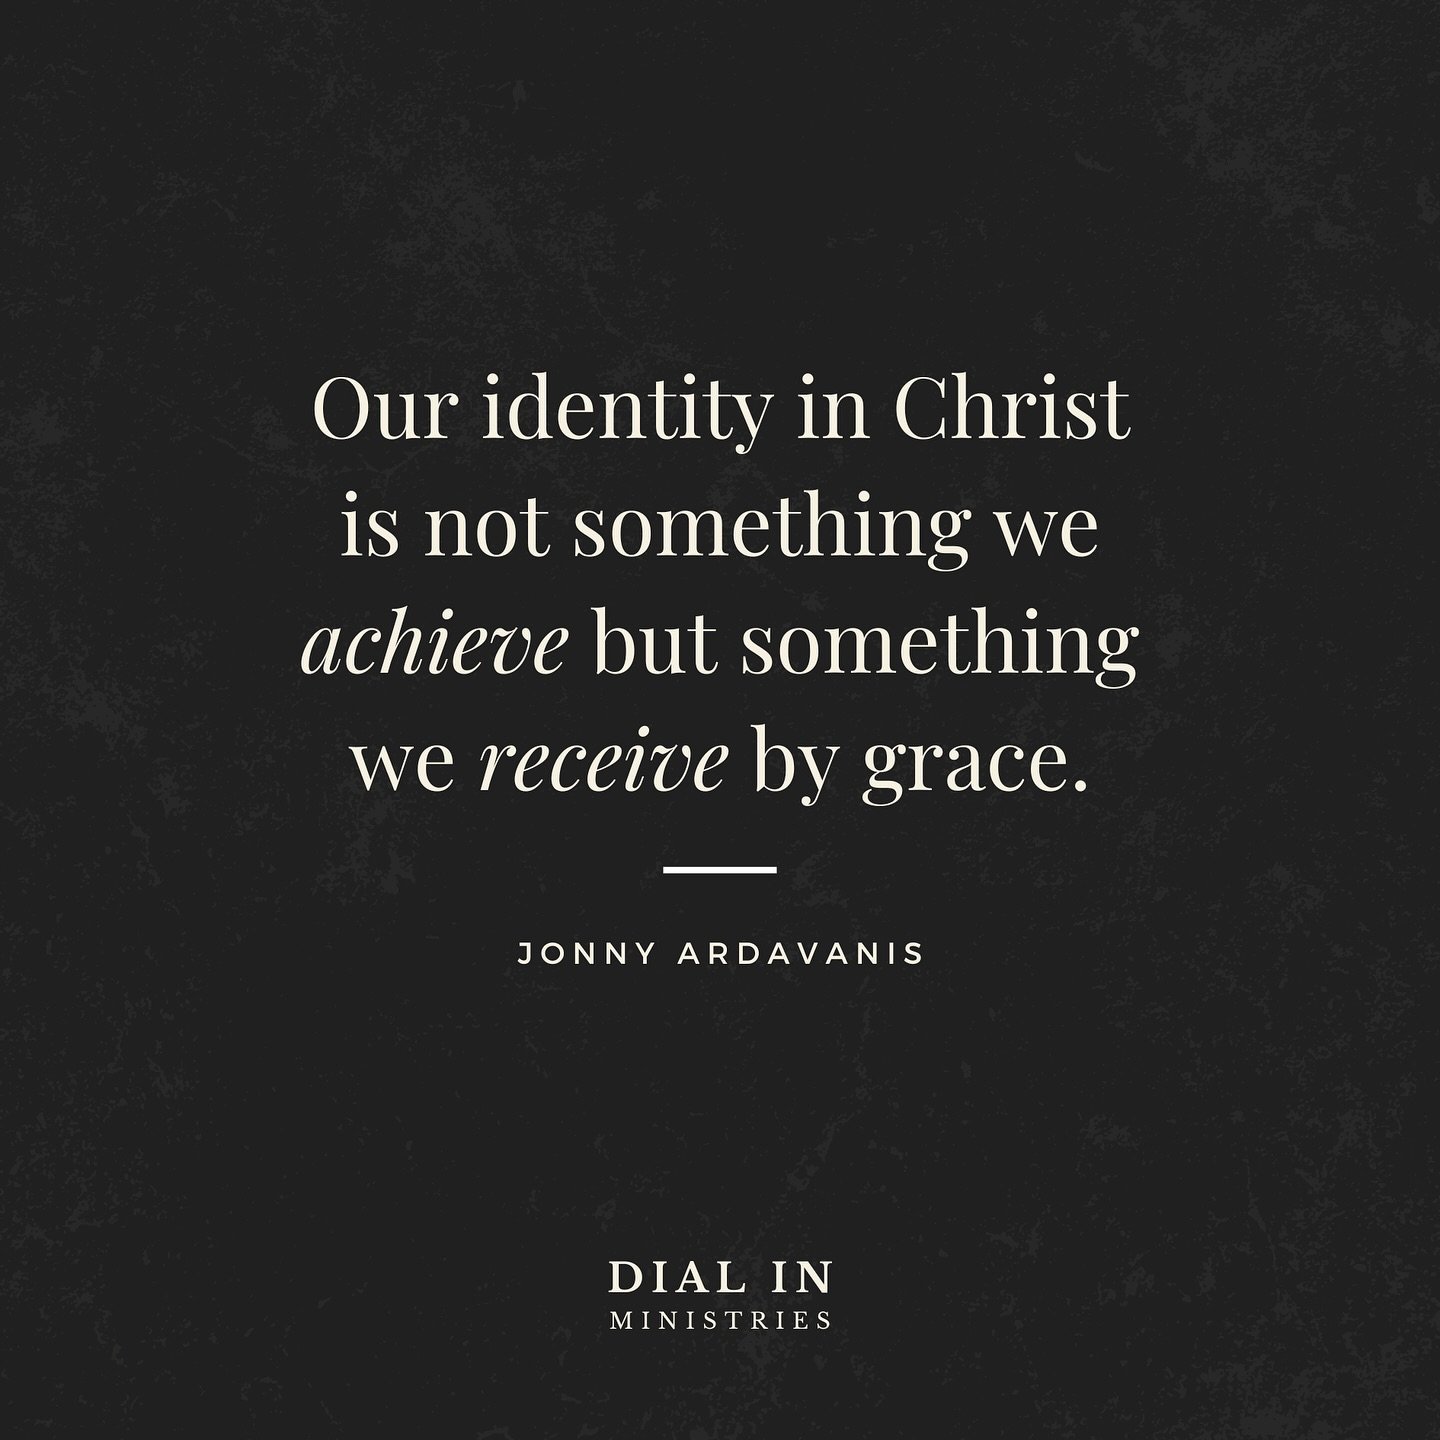 &ldquo;Our identity in Christ is not something we 𝑎𝑐ℎ𝑖𝑒𝑣𝑒 but something we 𝑟𝑒𝑐𝑒𝑖𝑣𝑒 by grace.&rdquo; @jonnyardavanis